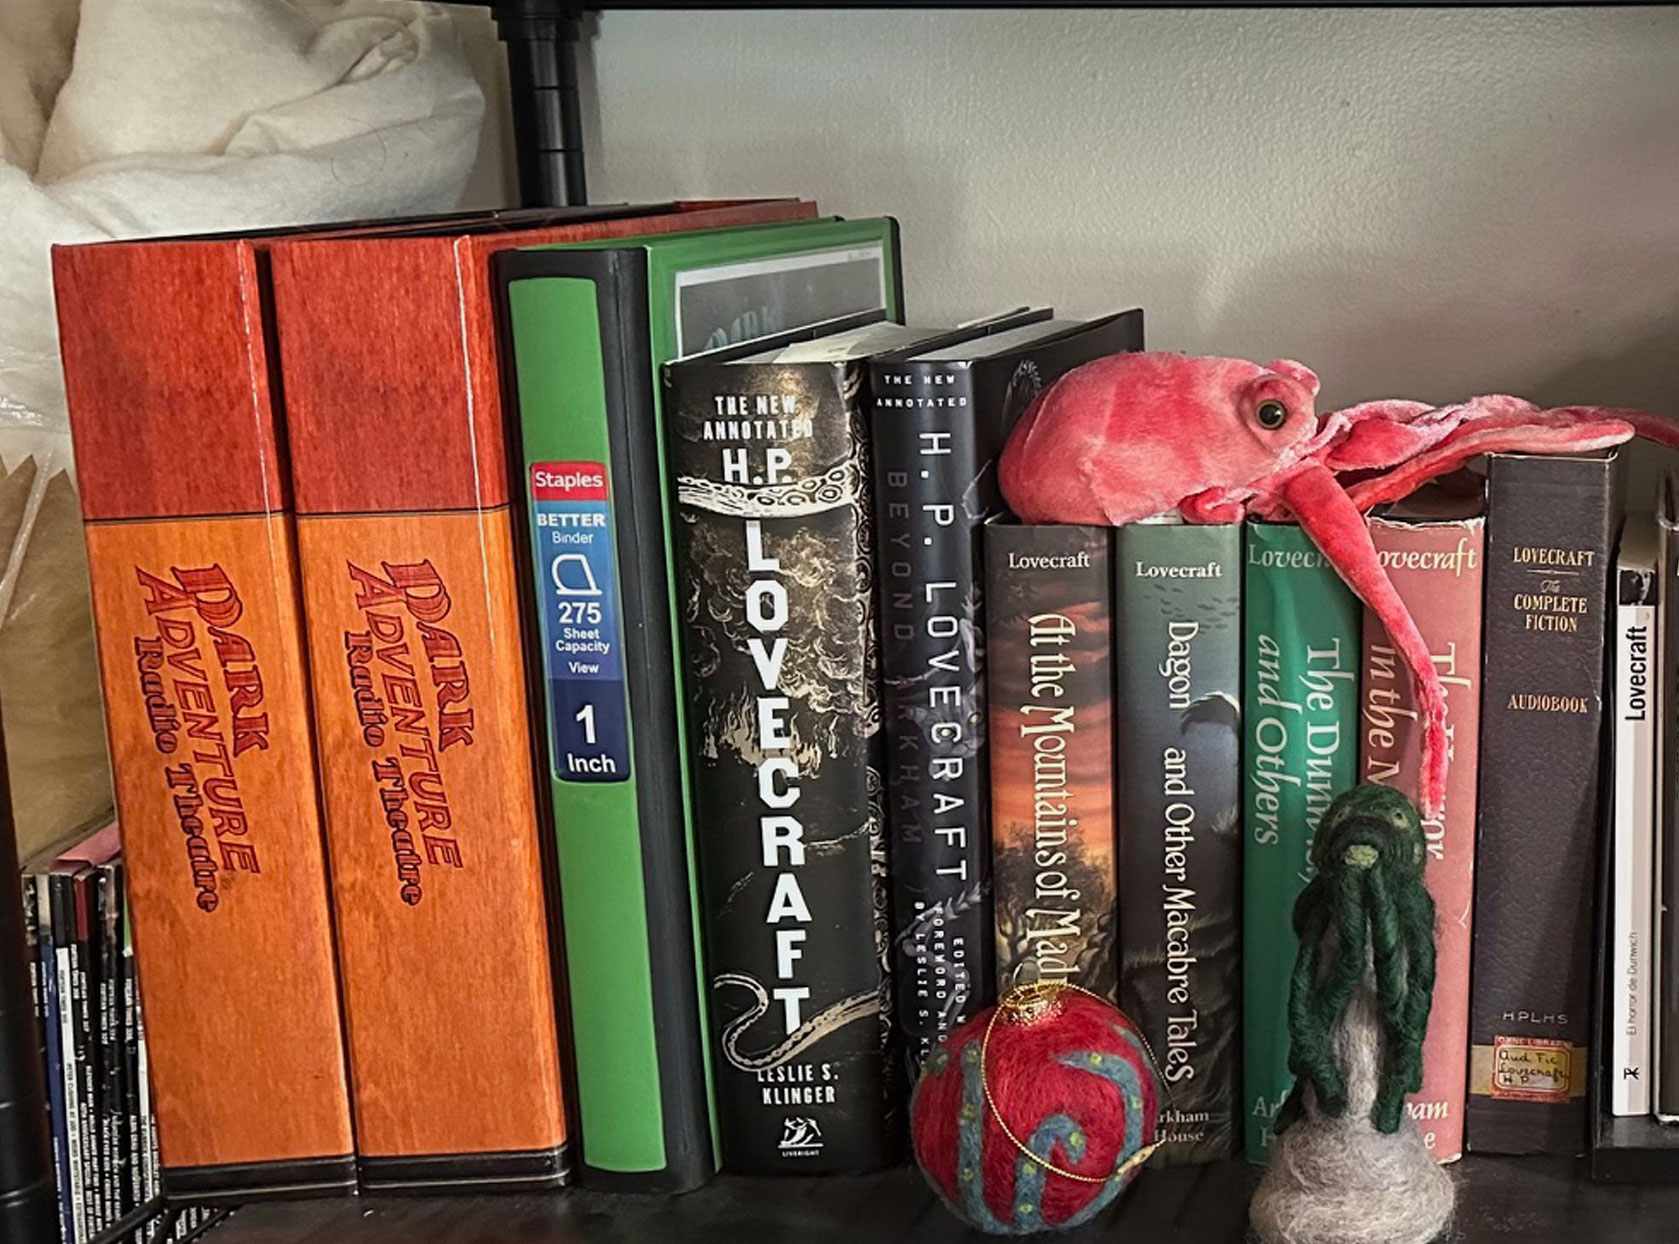 Some of Allison's books